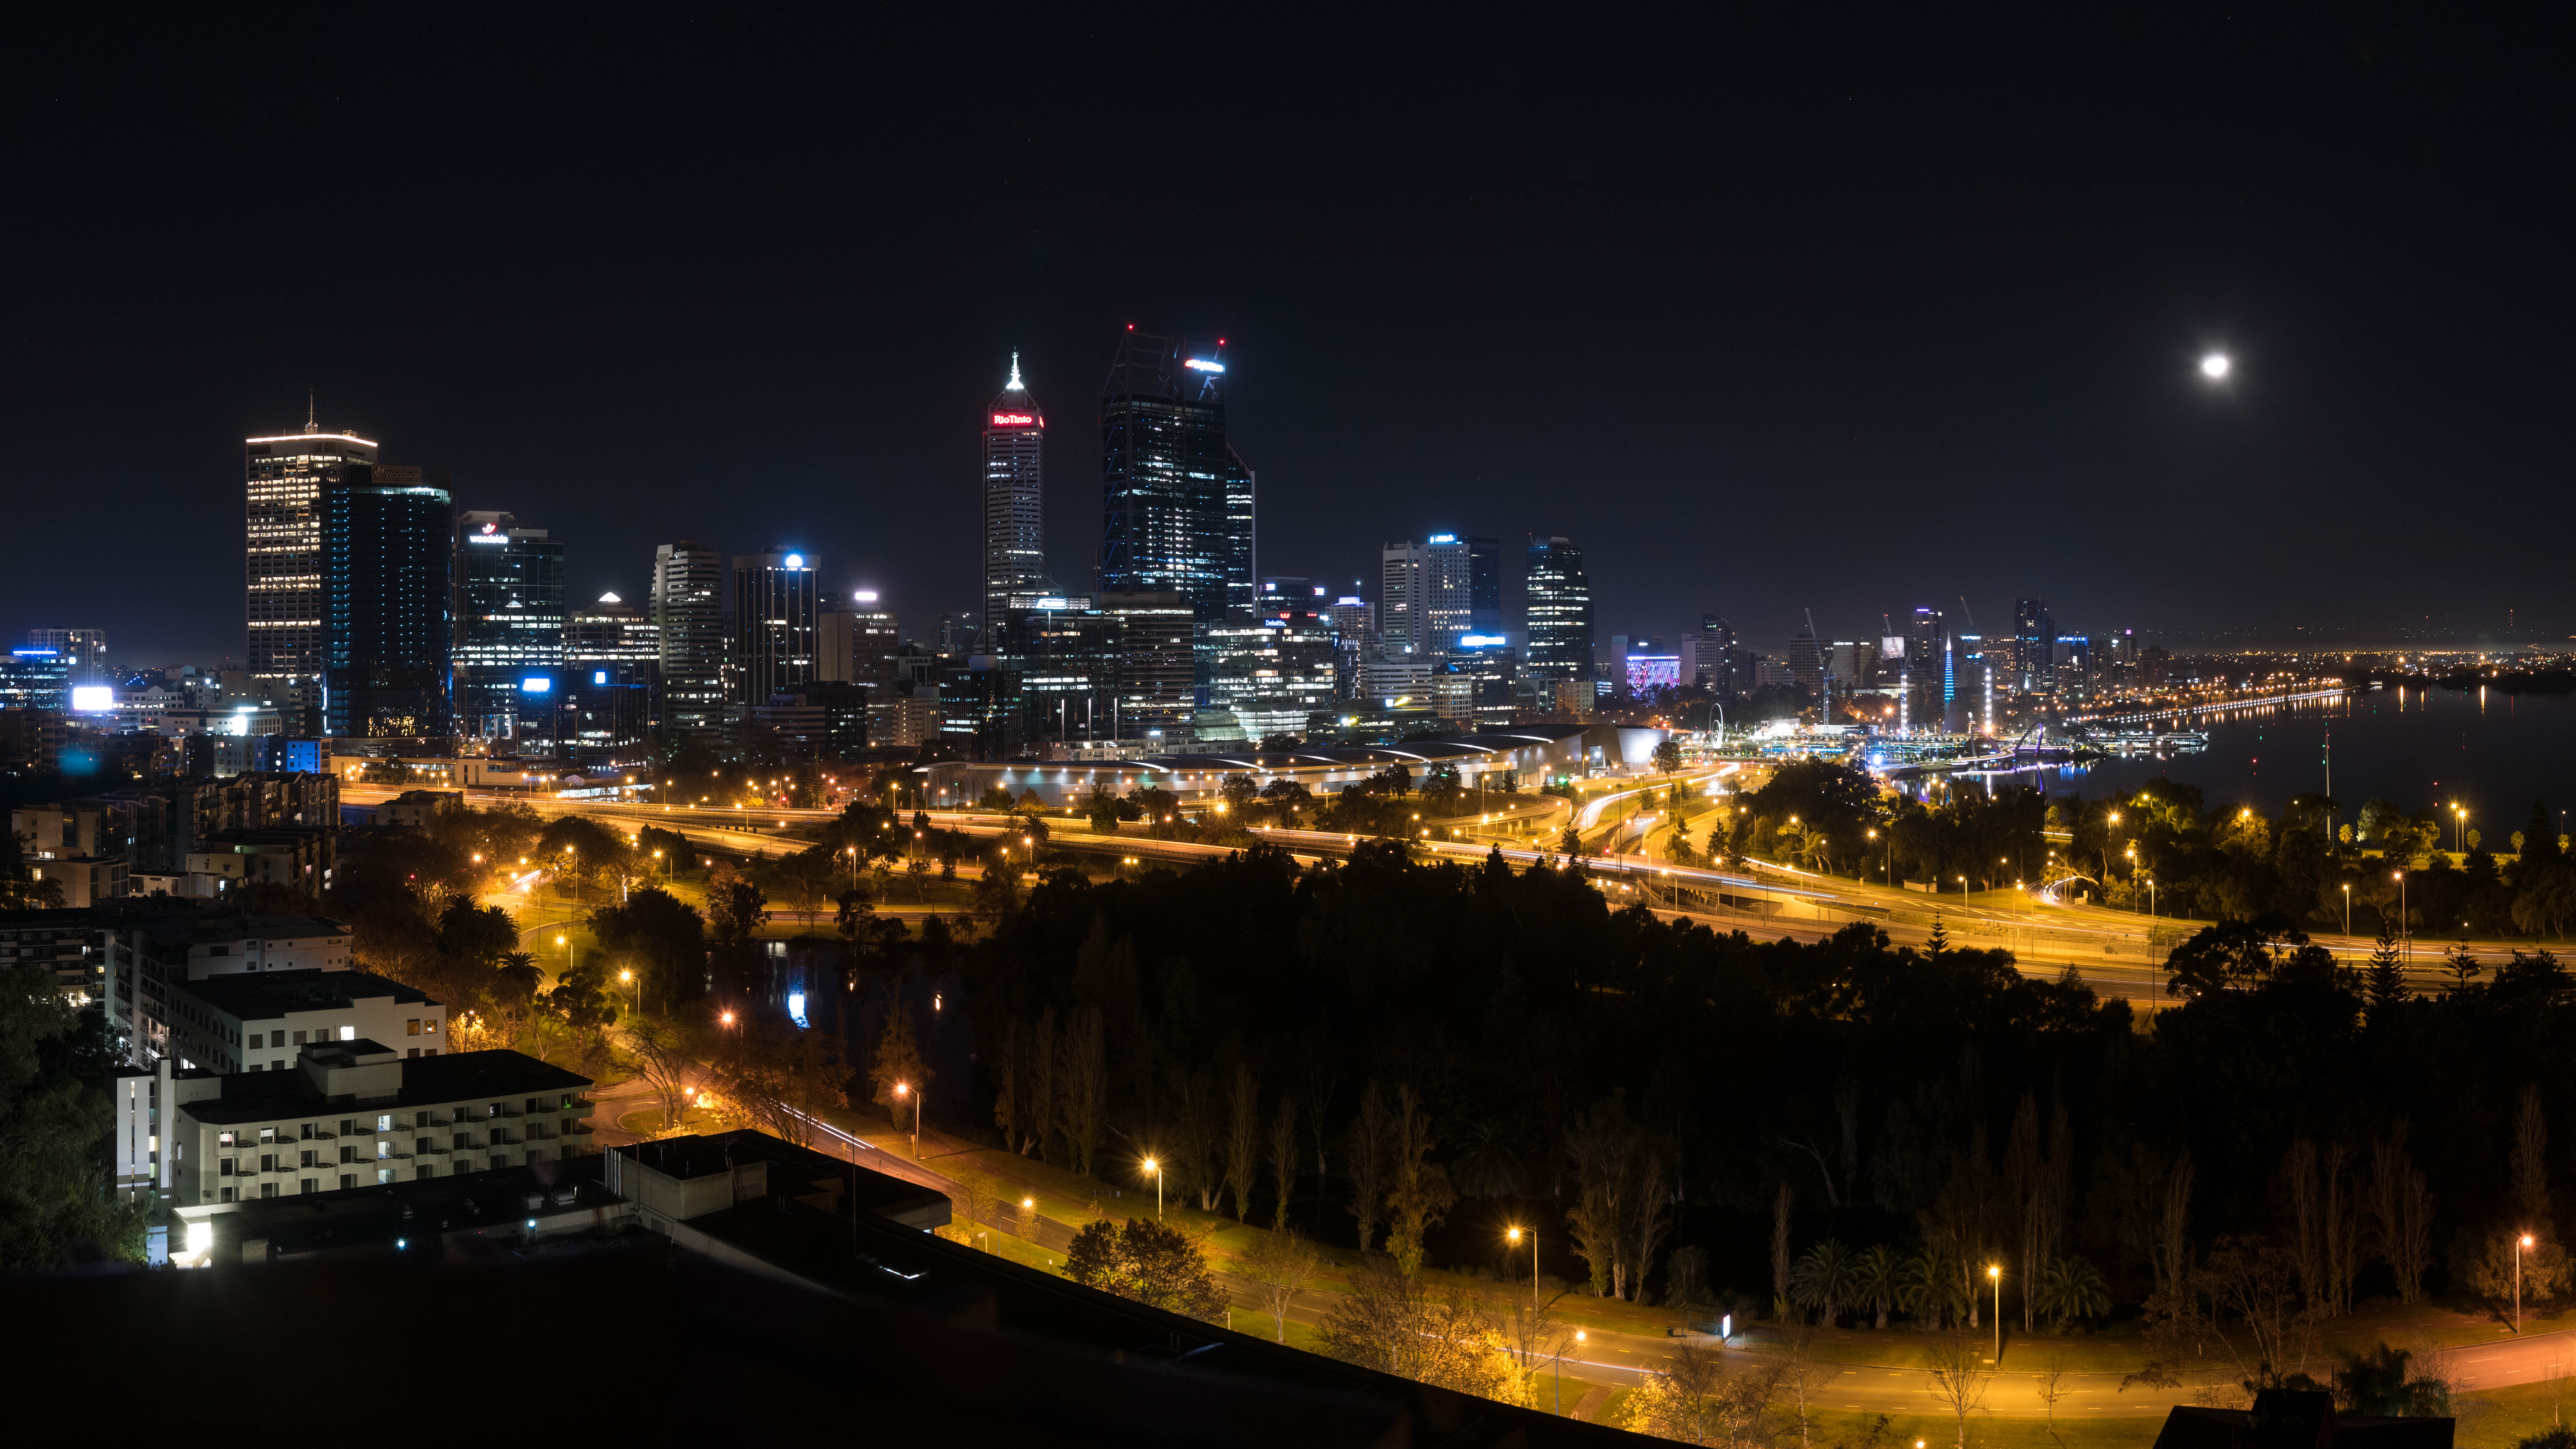 60196 download wallpaper cities, building, night city, city lights, skyscrapers, australia, perth screensavers and pictures for free